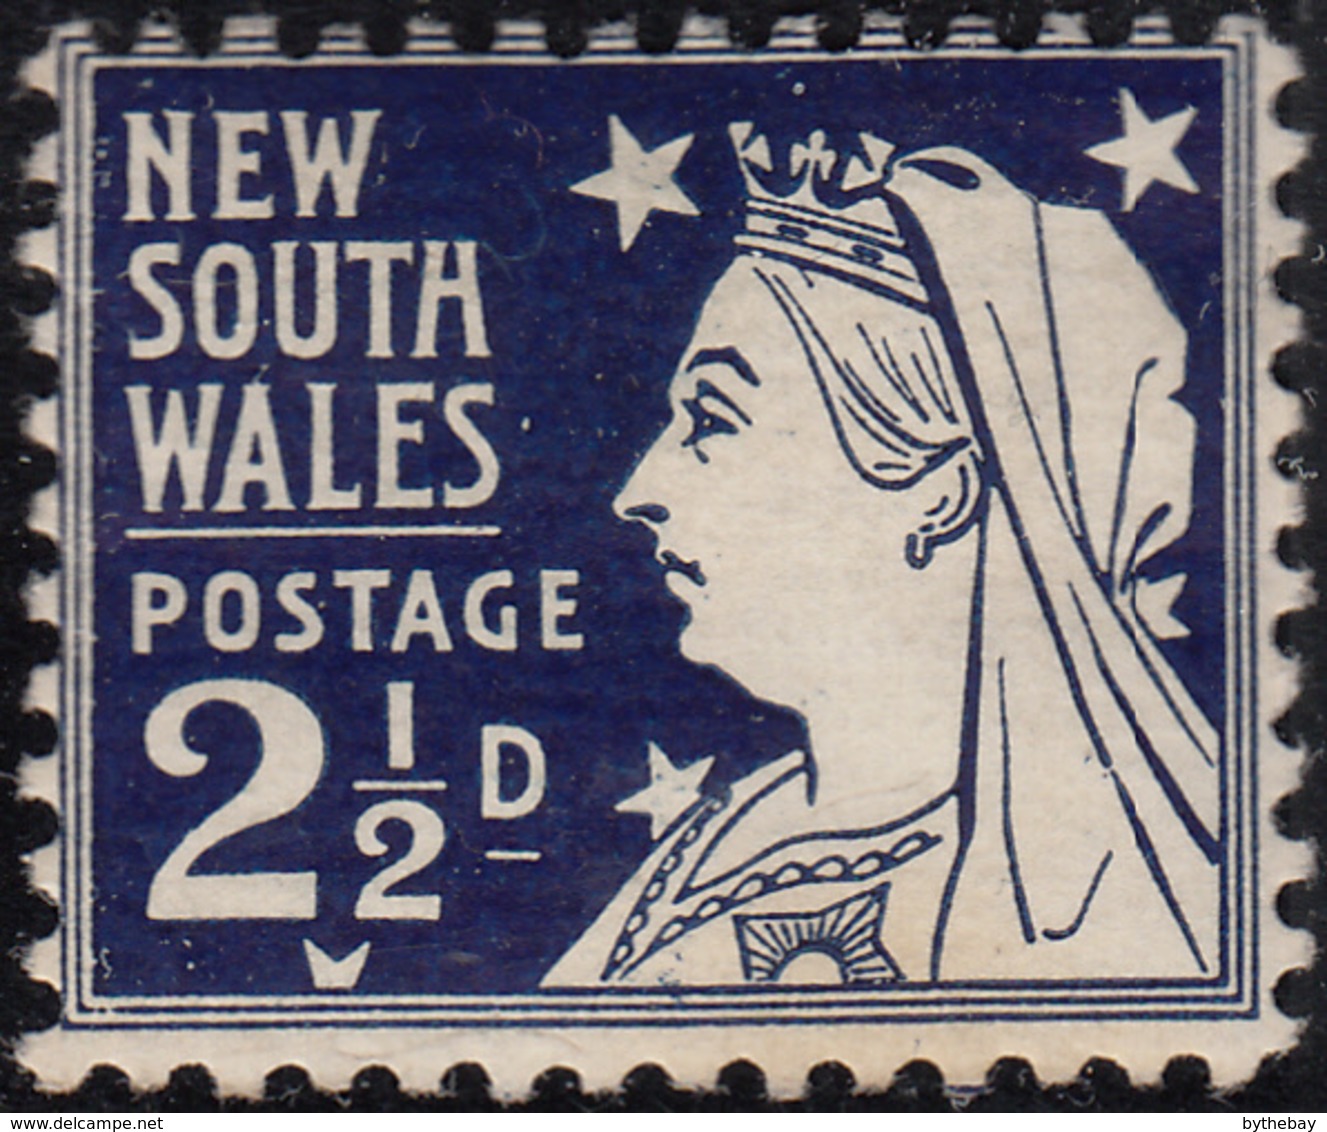 New South Wales 1899 MH Sc 104 2 1/ 2p Victoria Perf 12 X 11.5 - Mint Stamps